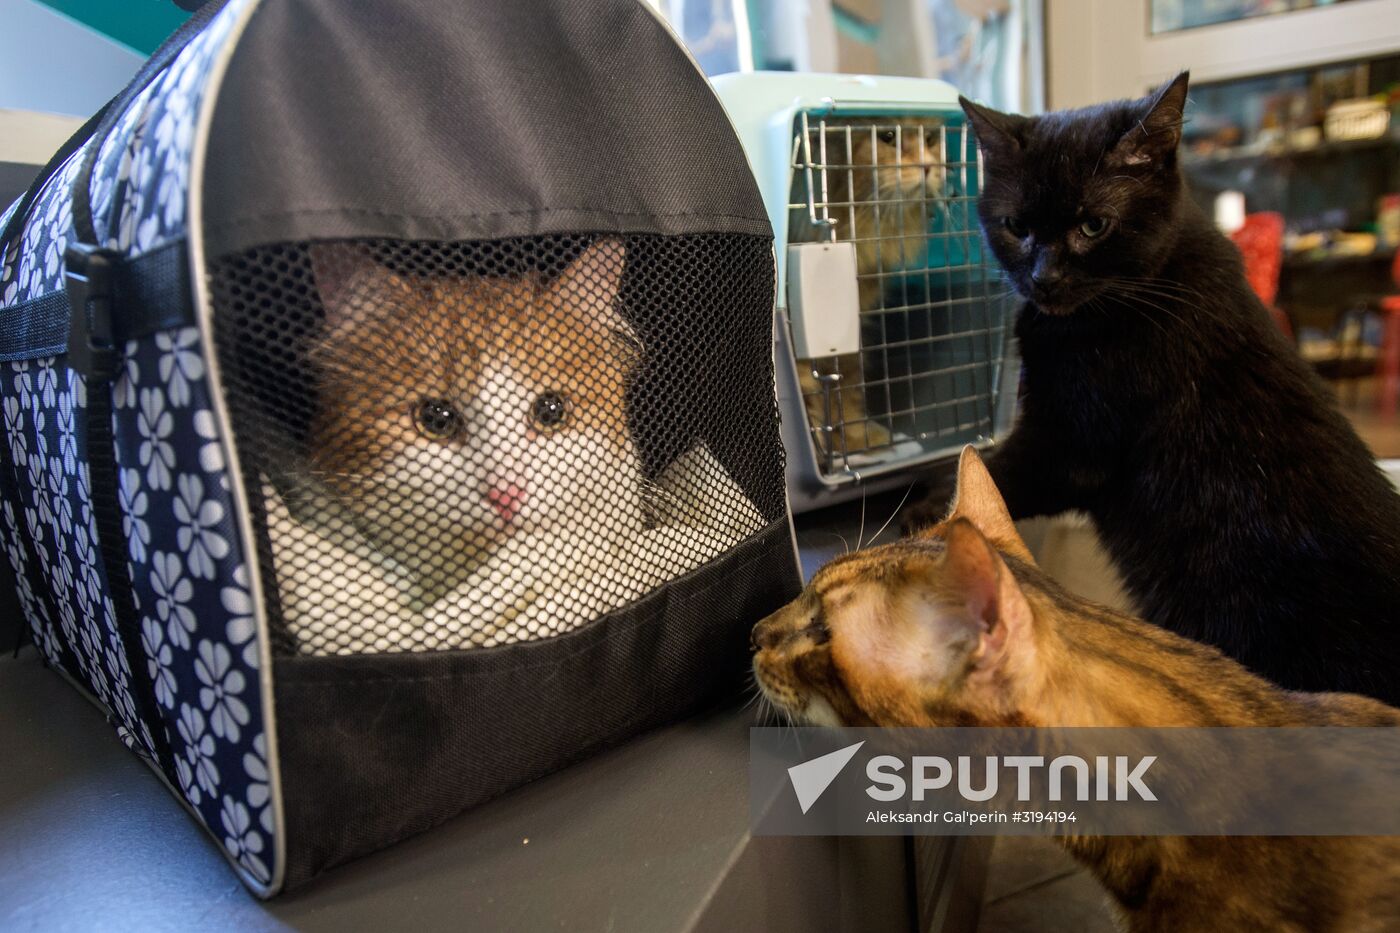 Hermitage cats were given away in St. Petersburg